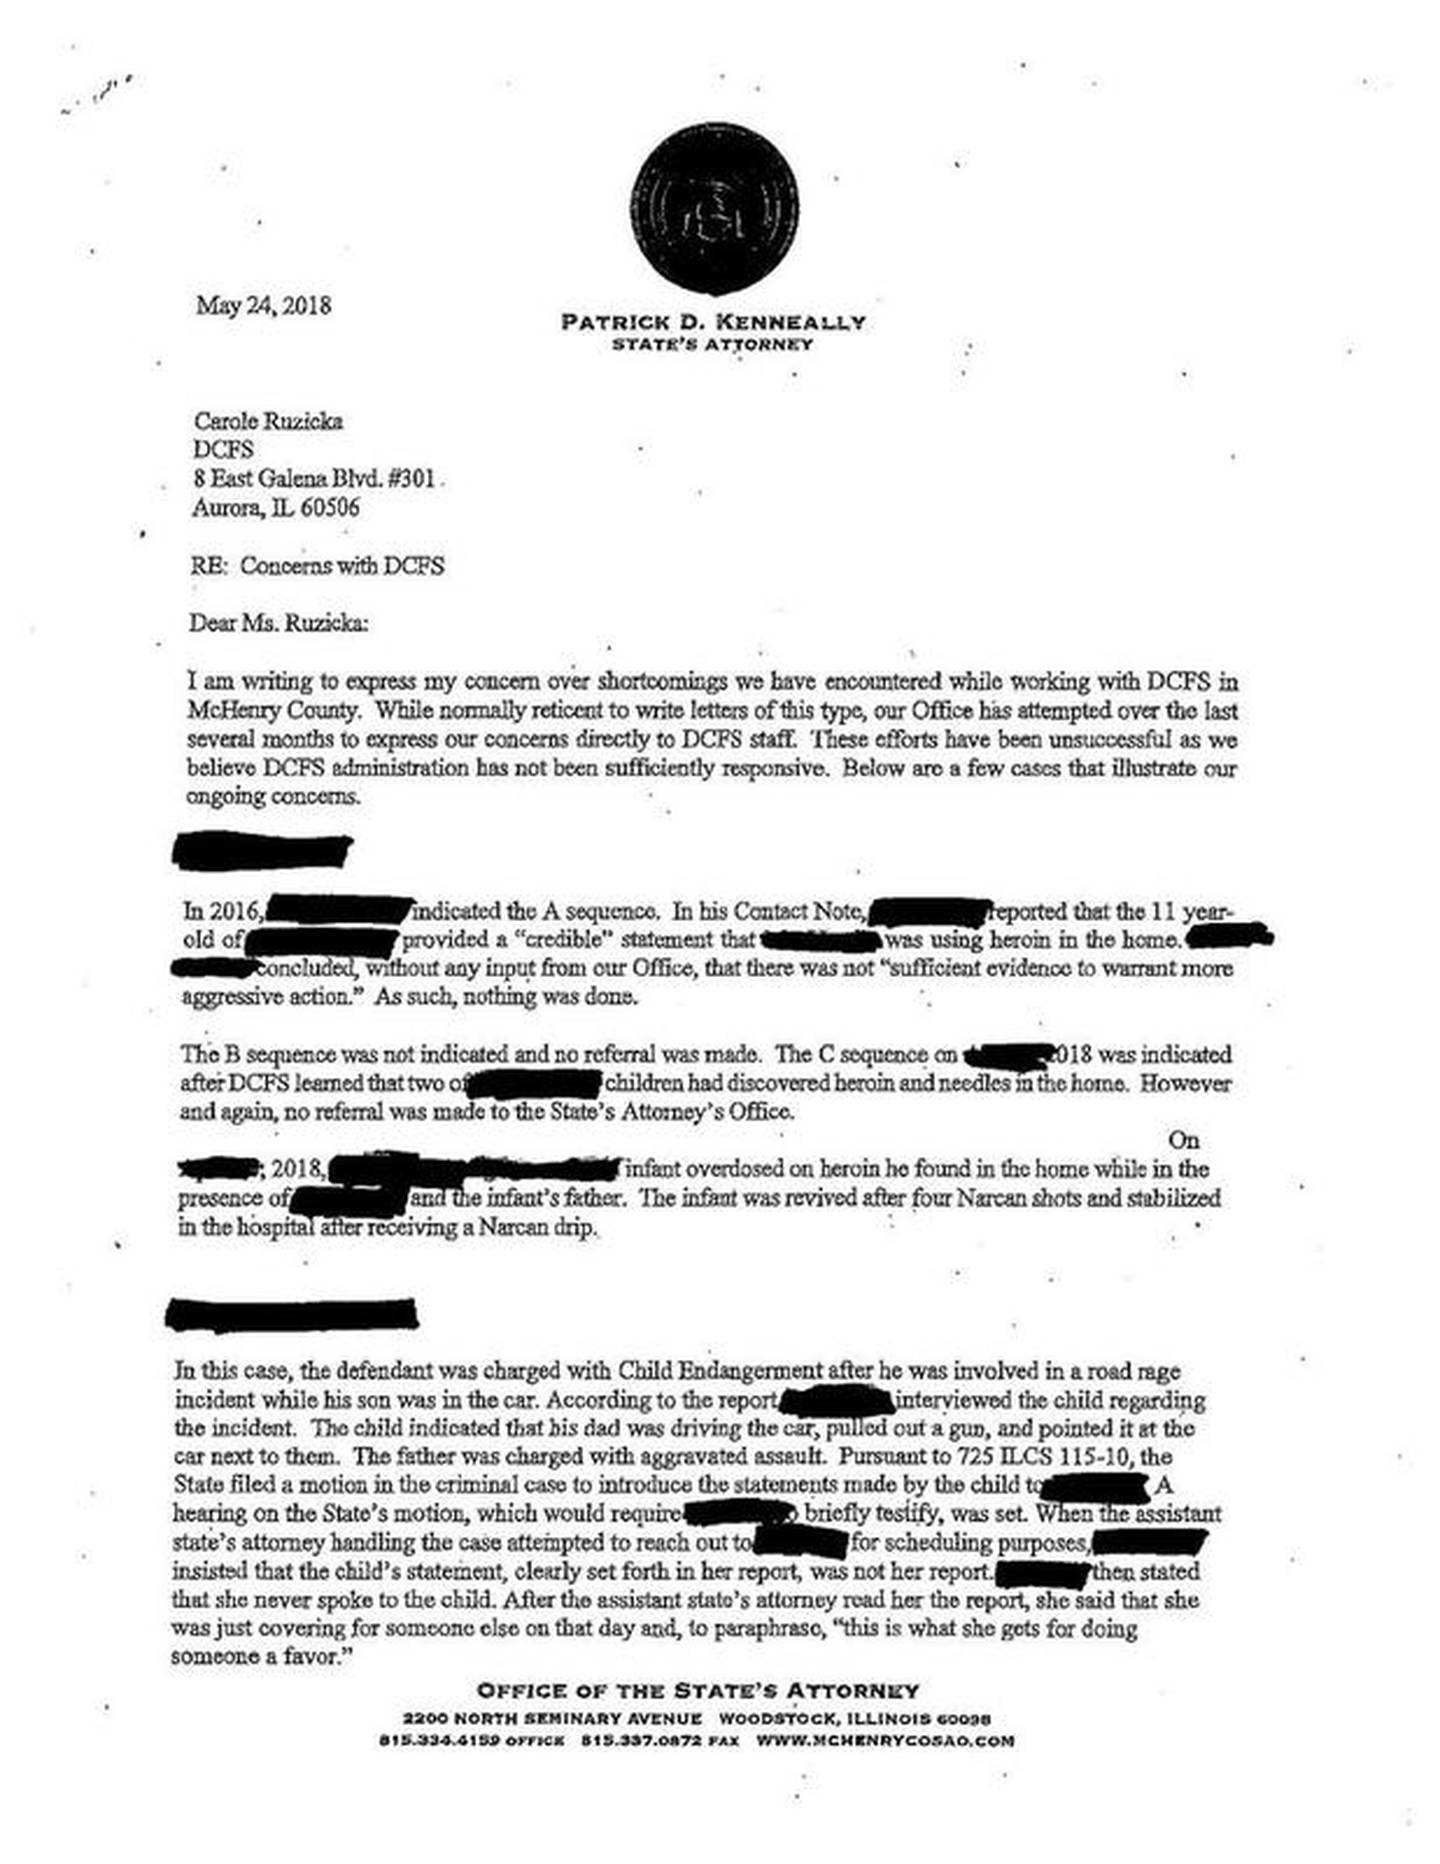 Document: McHenry County State's Attorney letter to DCFS